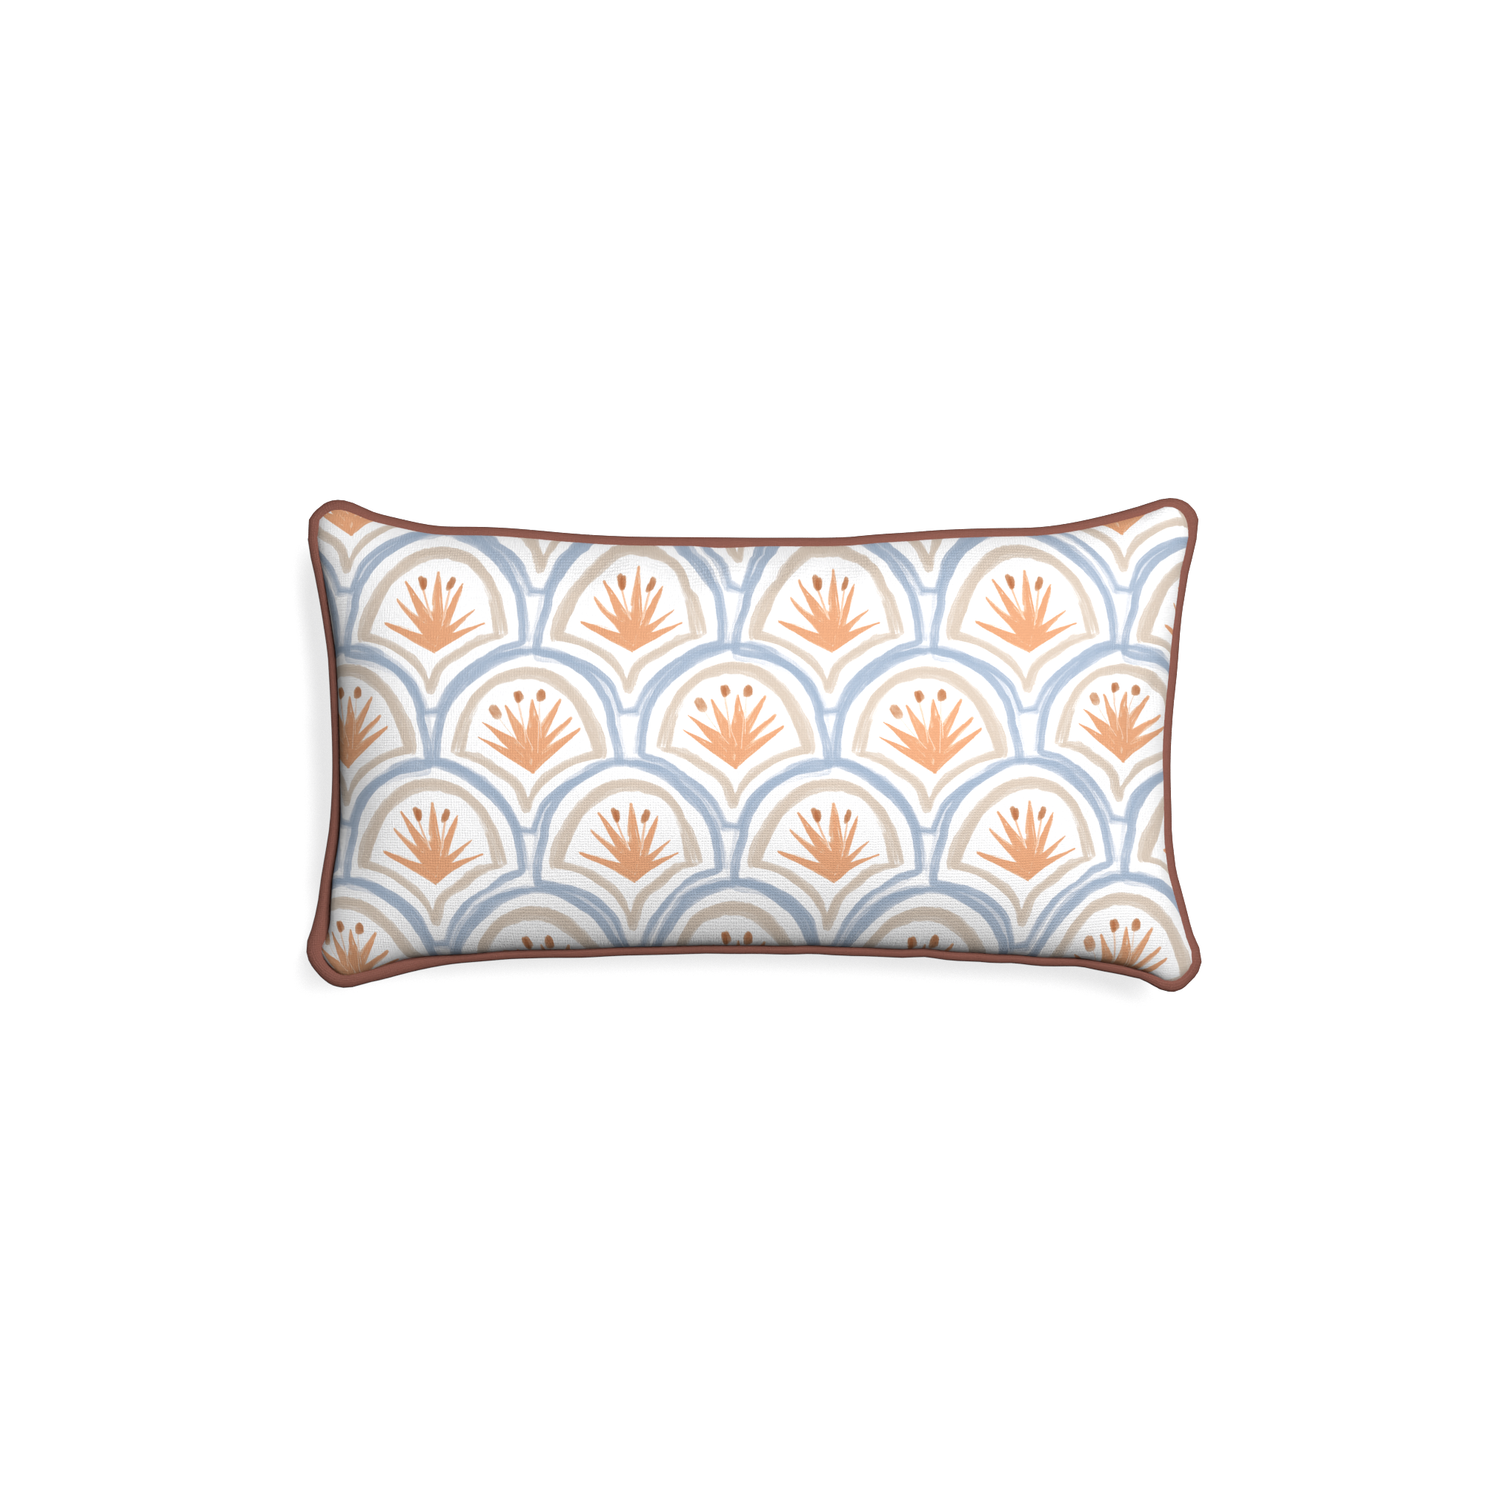 Petite-lumbar thatcher apricot custom art deco palm patternpillow with w piping on white background